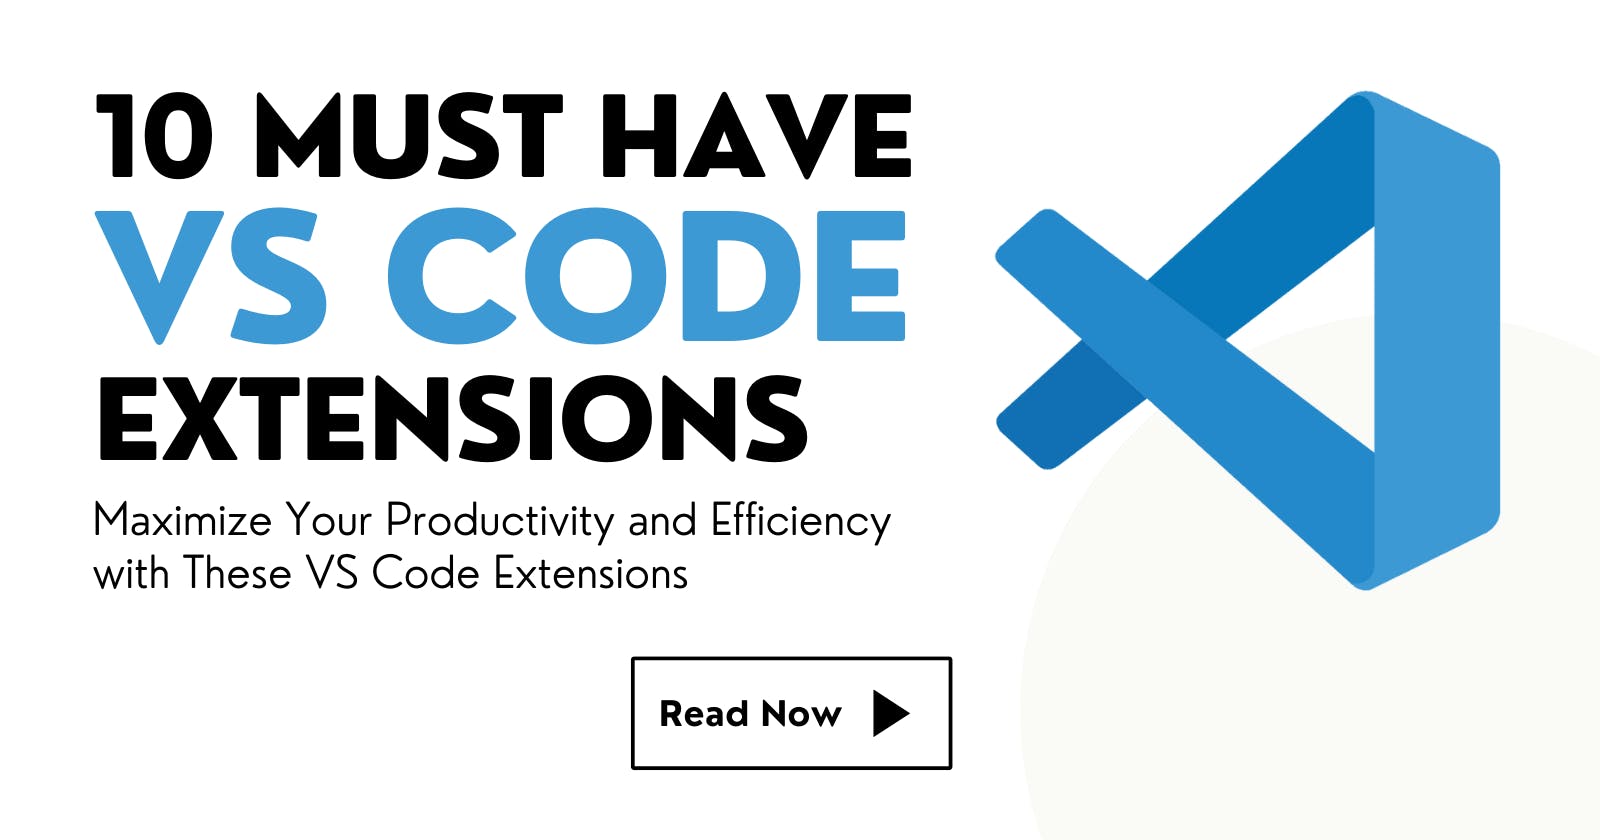 10 Must Have VS Code Extensions 
[For Developers]